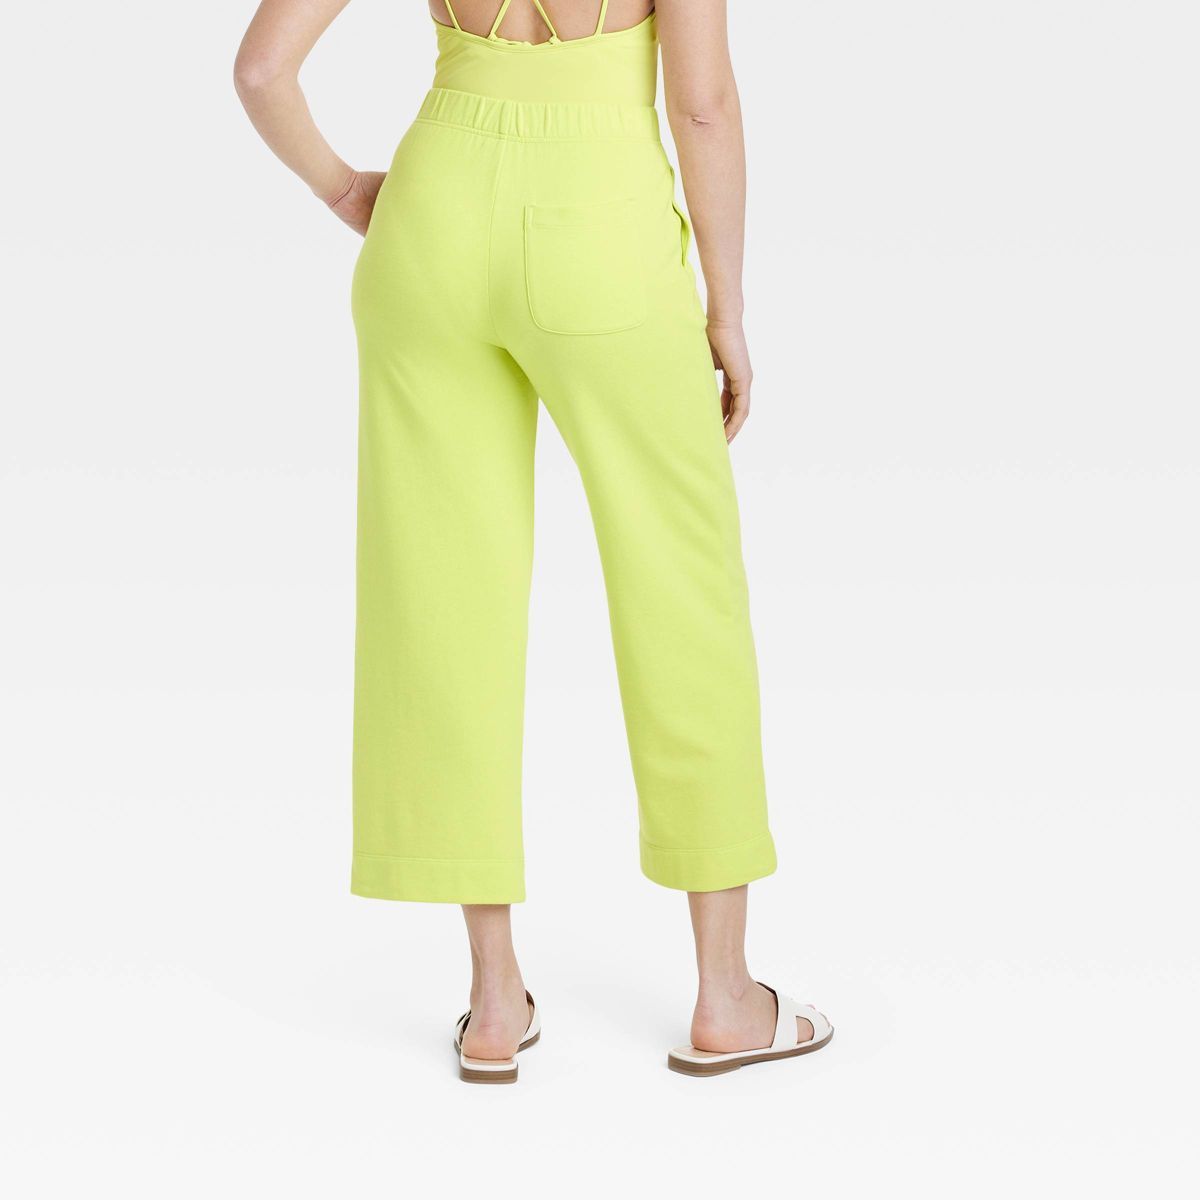 Women's High-Rise Cropped Sweatpants - A New Day™ | Target